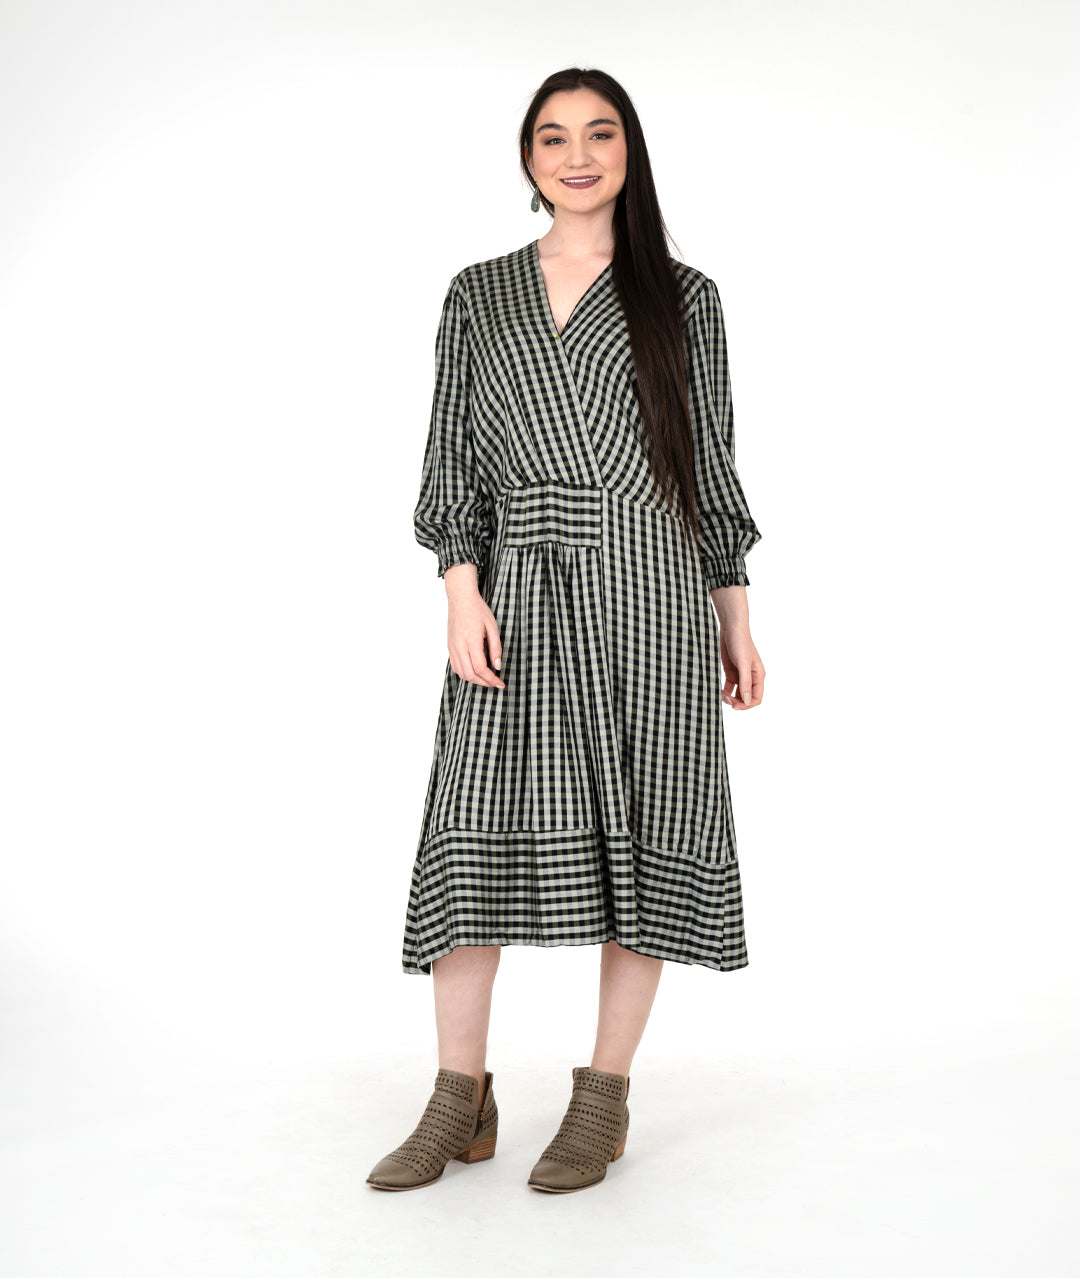 model in a green plaid dress with a full sleeve and contrasting hem panel